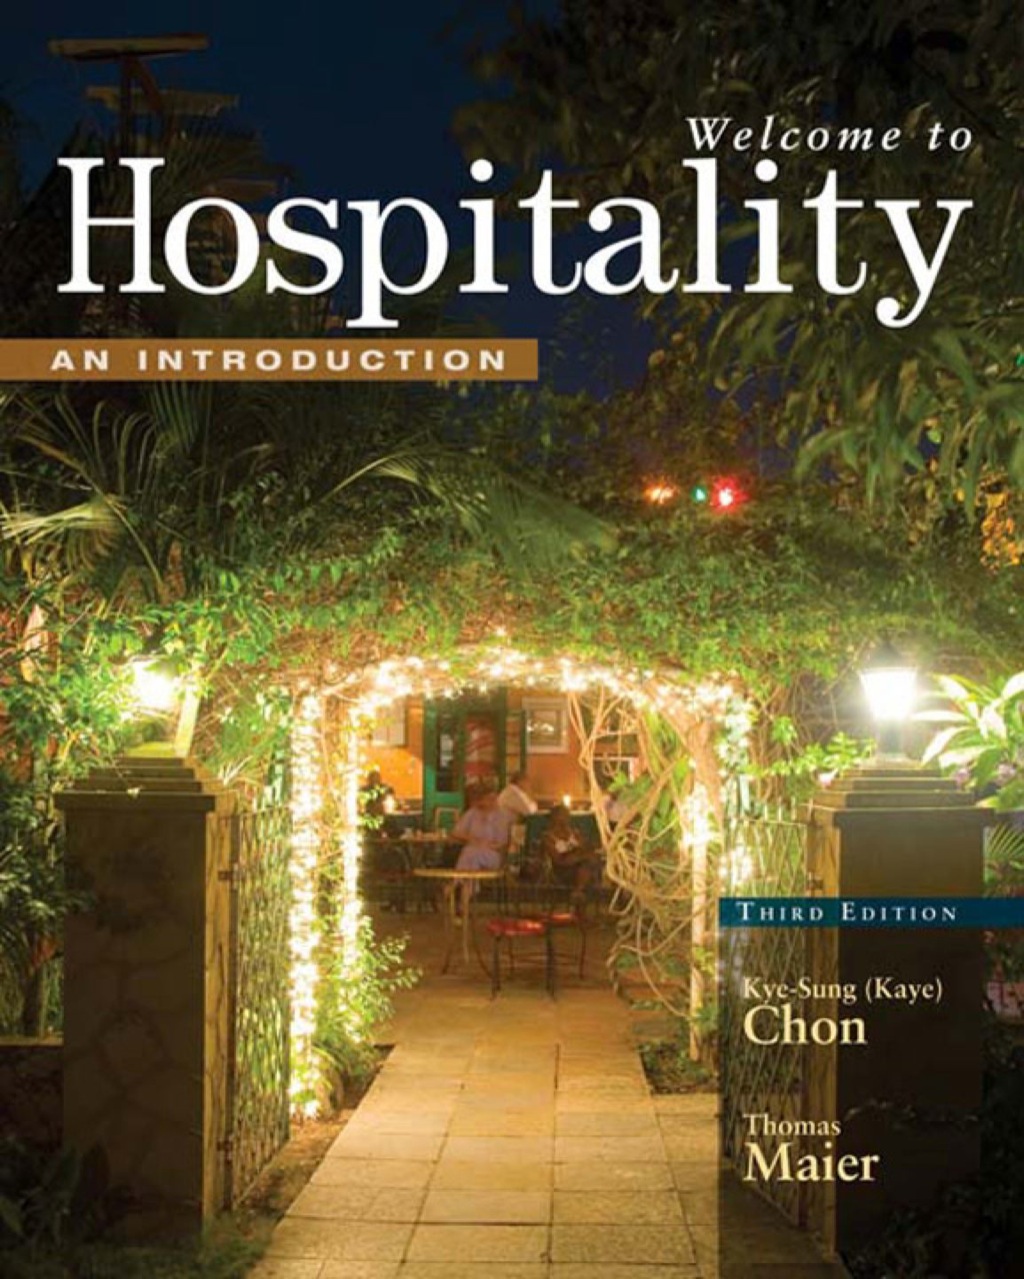 Welcome to Hospitality: An Introduction - 3rd Edition (eBook Rental)